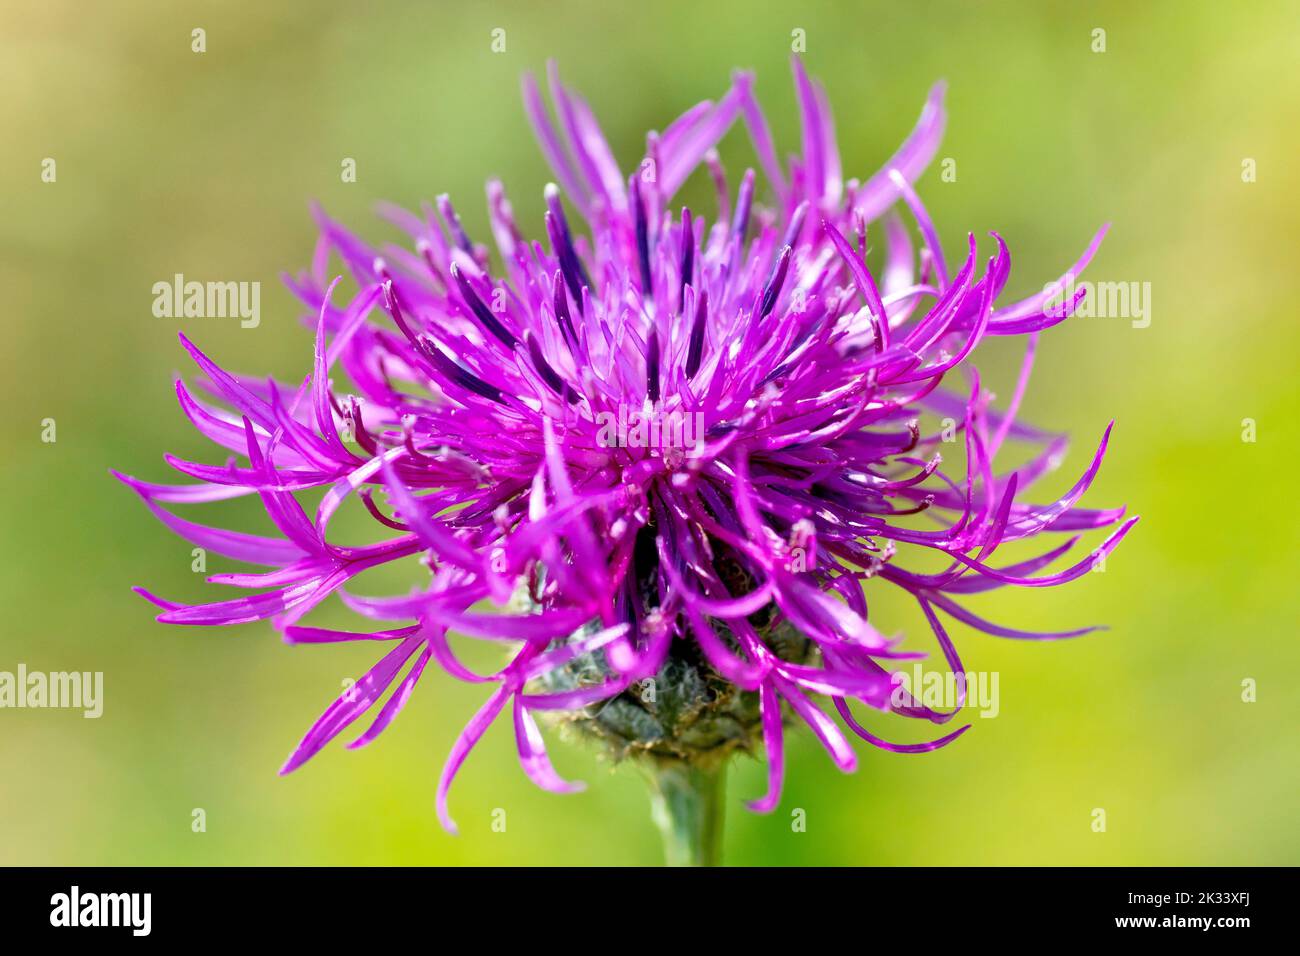 Greater Knapweed (centaurea scabiosa), close up of a solitary isolated flowerhead of the plant, showing the distinctive larger outer florets. Stock Photo